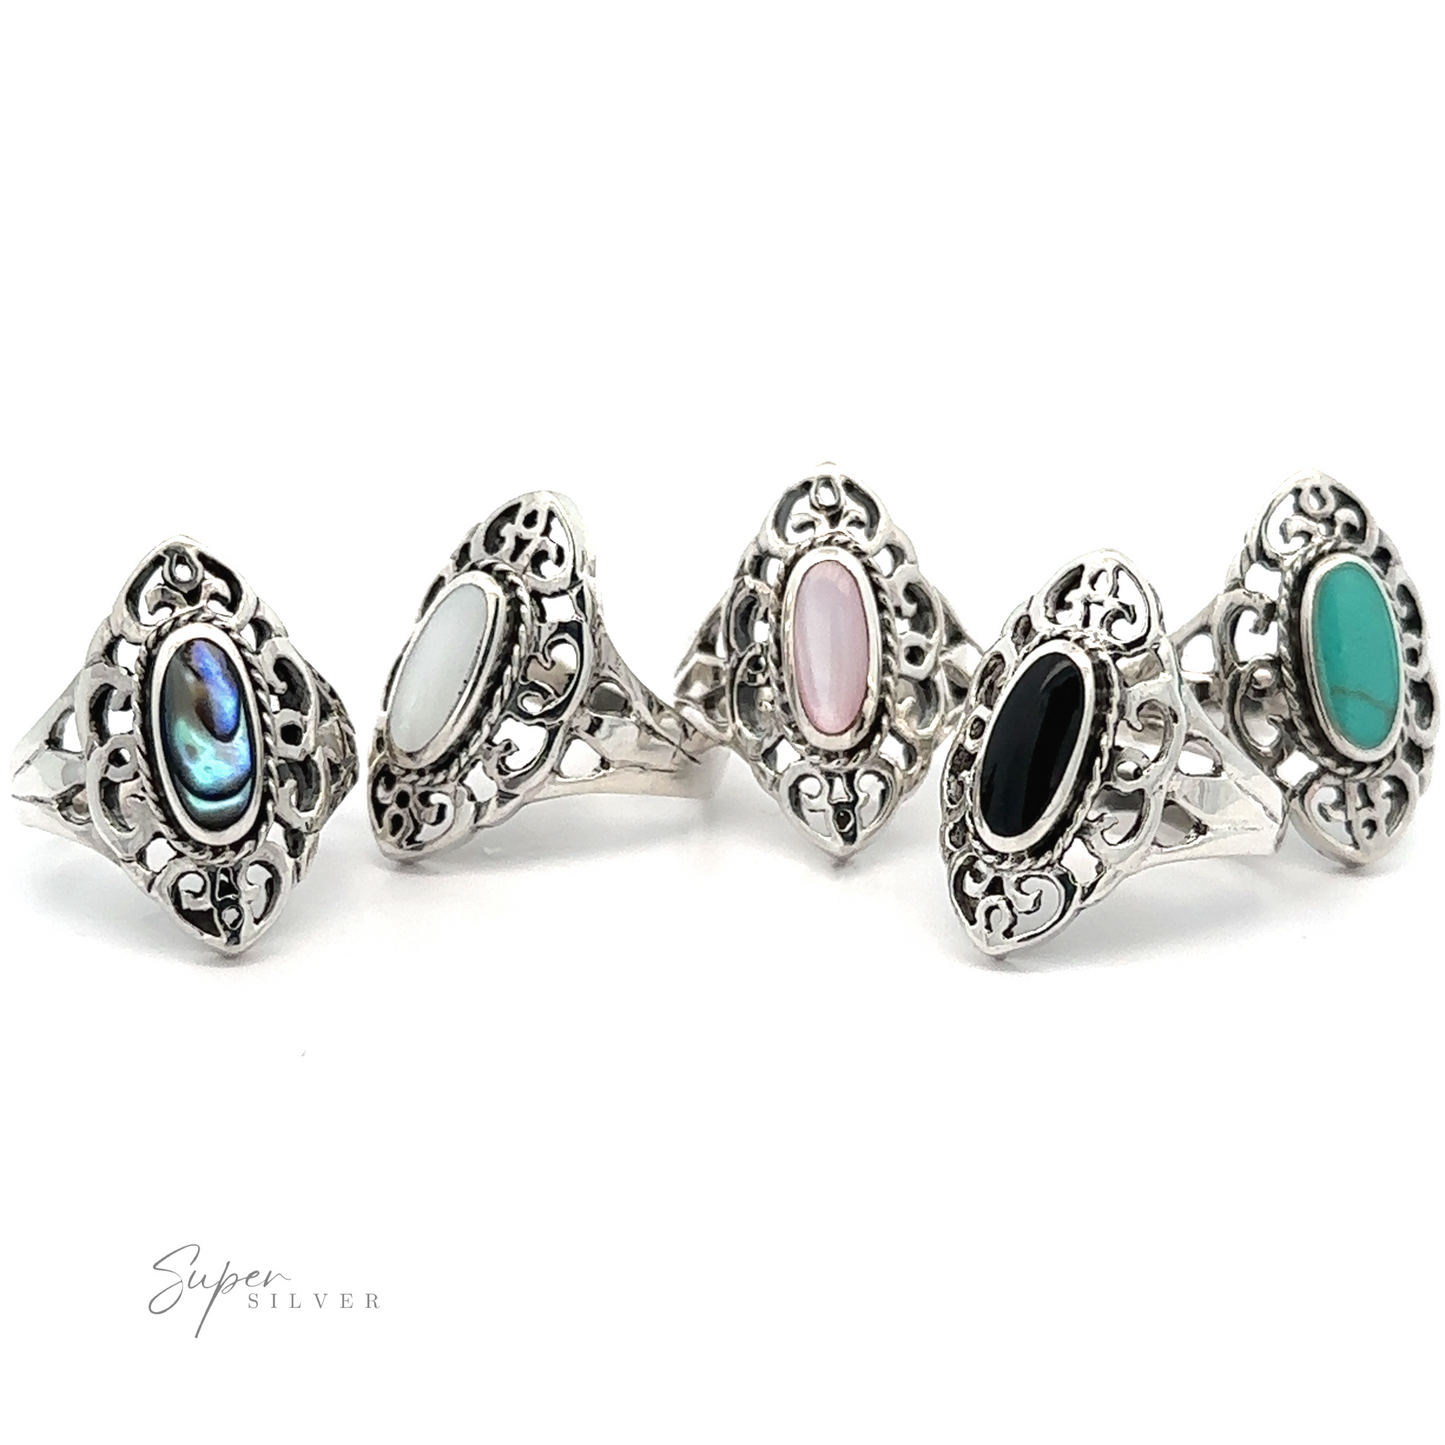 A collection of five Marquise Filigree Inlay Stone rings with mesmerizing gemstones on a white background.